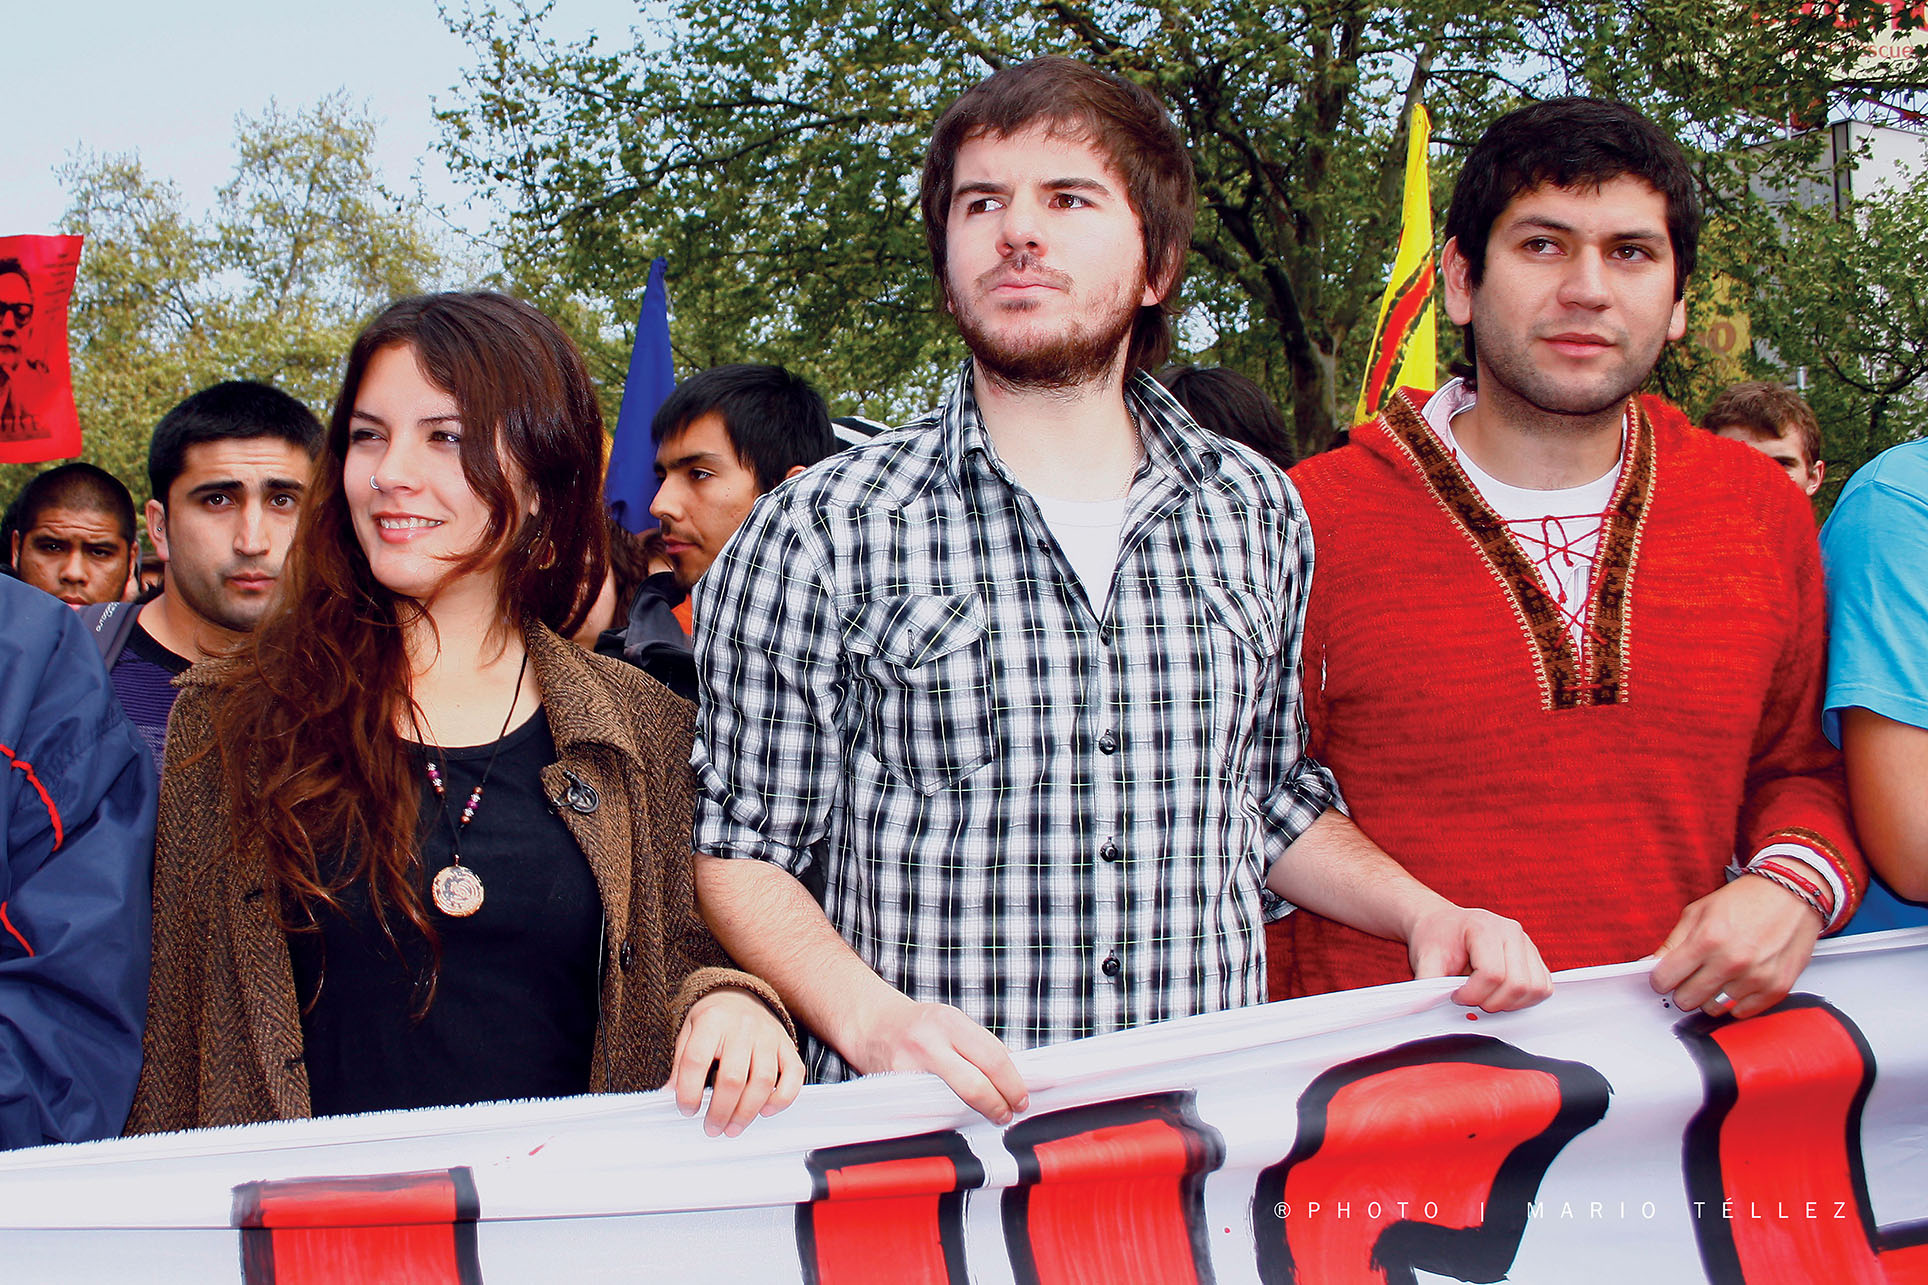 Leaders of the Chilean student movement: Camila Vallejo, Giorgio Jackson and Camilo Ballesteros holding a banner together at a march, September 2011. (Photo by Mario Tellez Cardemil.)